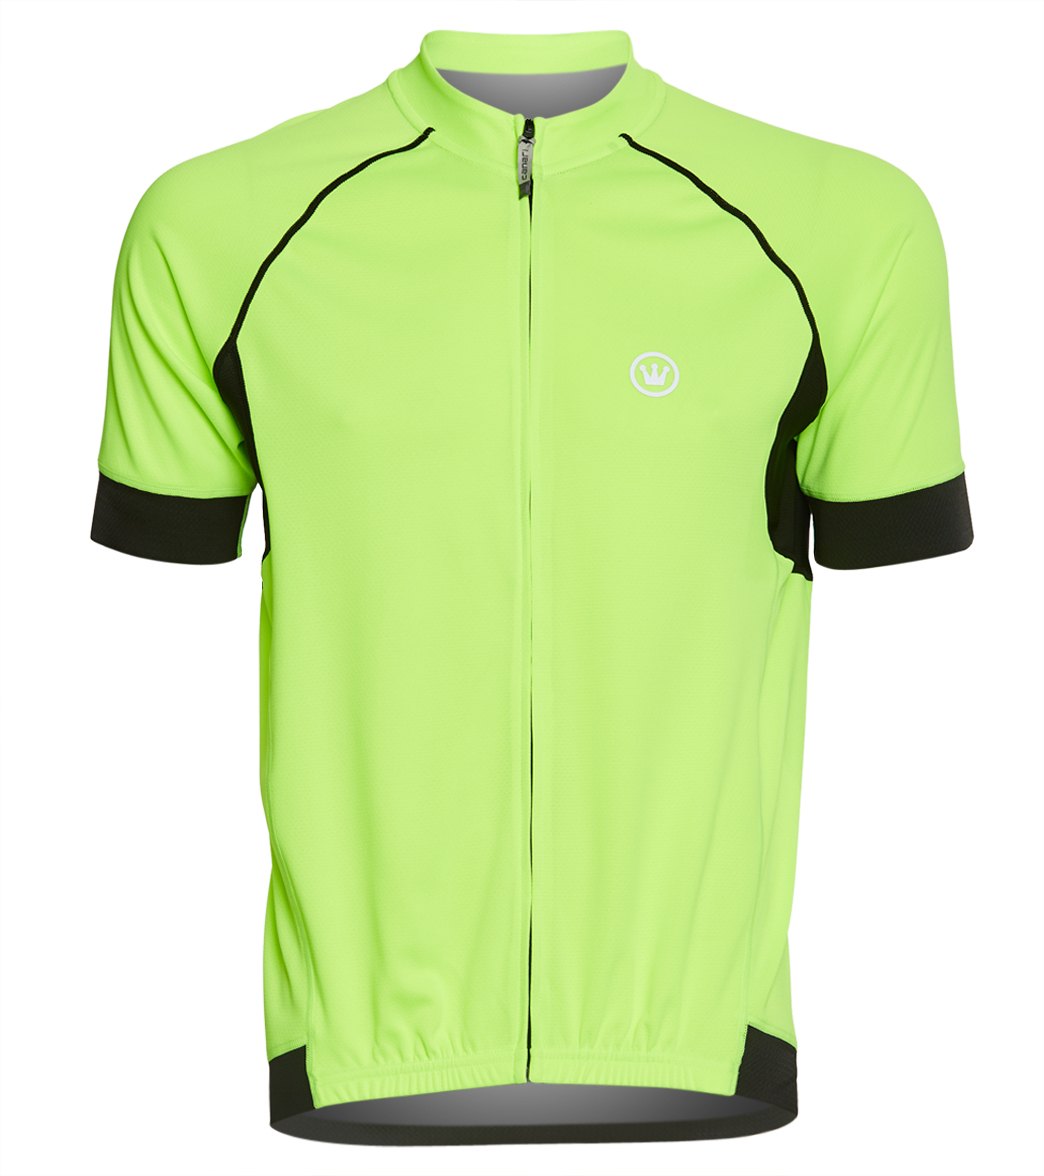 Canari Men's Xrt Pro Cycling Jersey - Killer Yellow Small Polyester - Swimoutlet.com